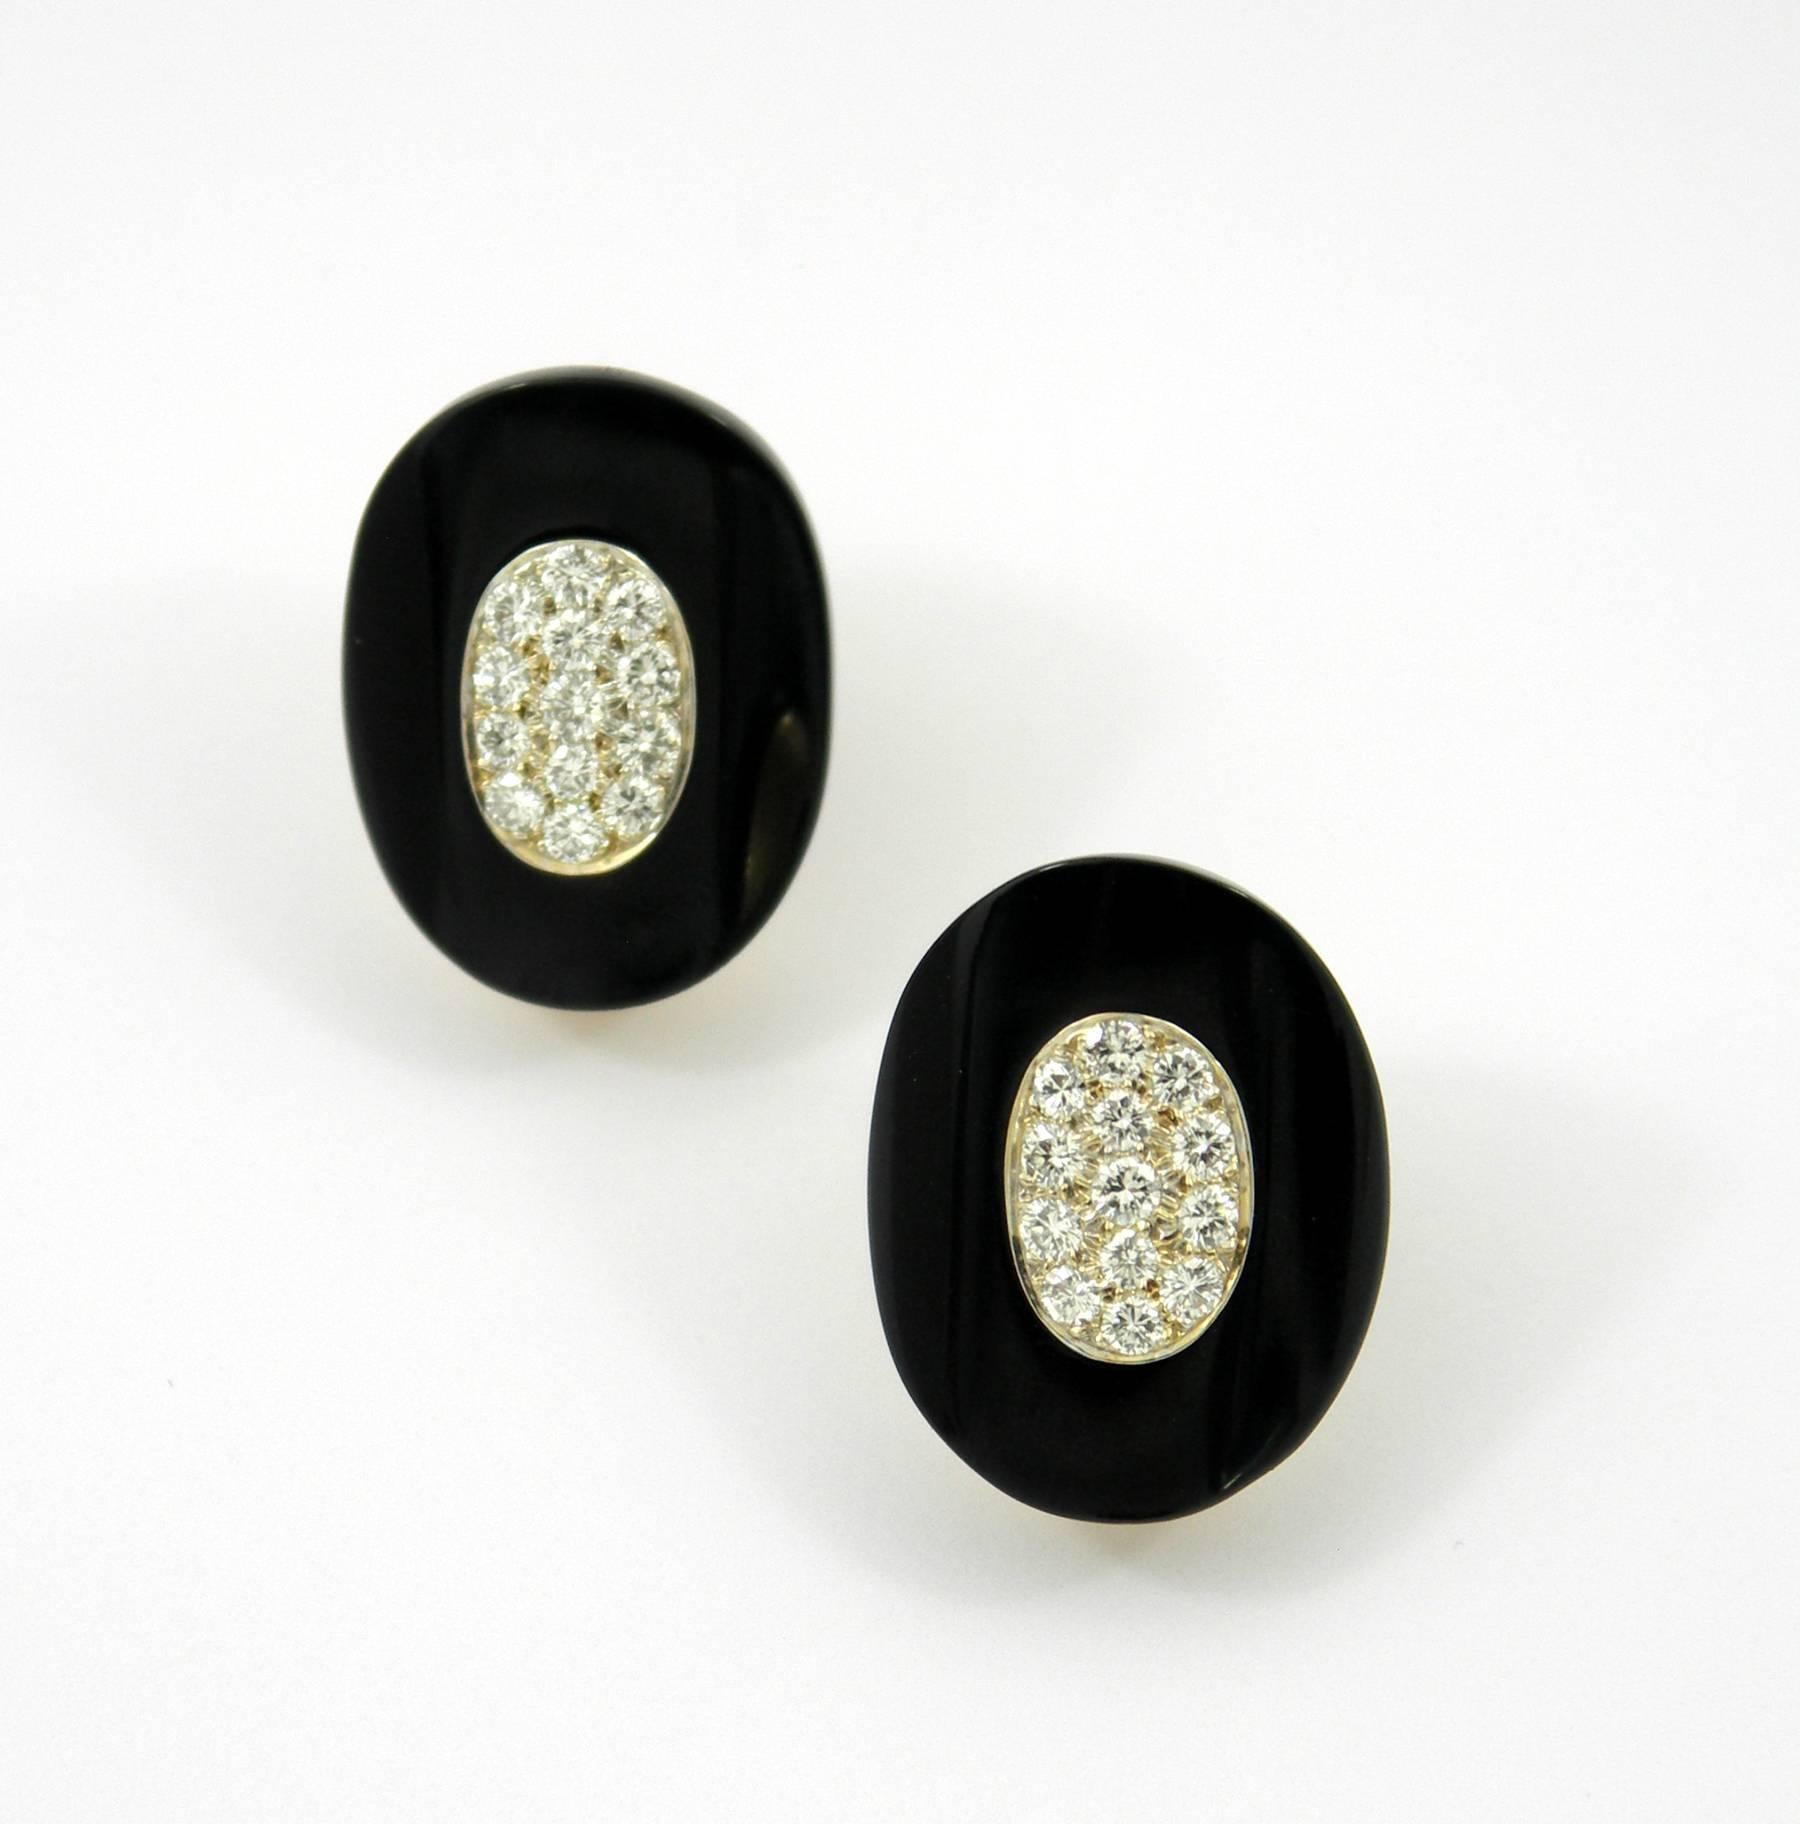 Elongated oval earrings, each centered around 15 pave' set, round brilliant cut diamonds, surrounded by a ring of onyx. Diamonds weigh a total of approximately 1.33ct of overall E/F color and VVS2/VS1 clarity. Each earring measures 1 inch long, and